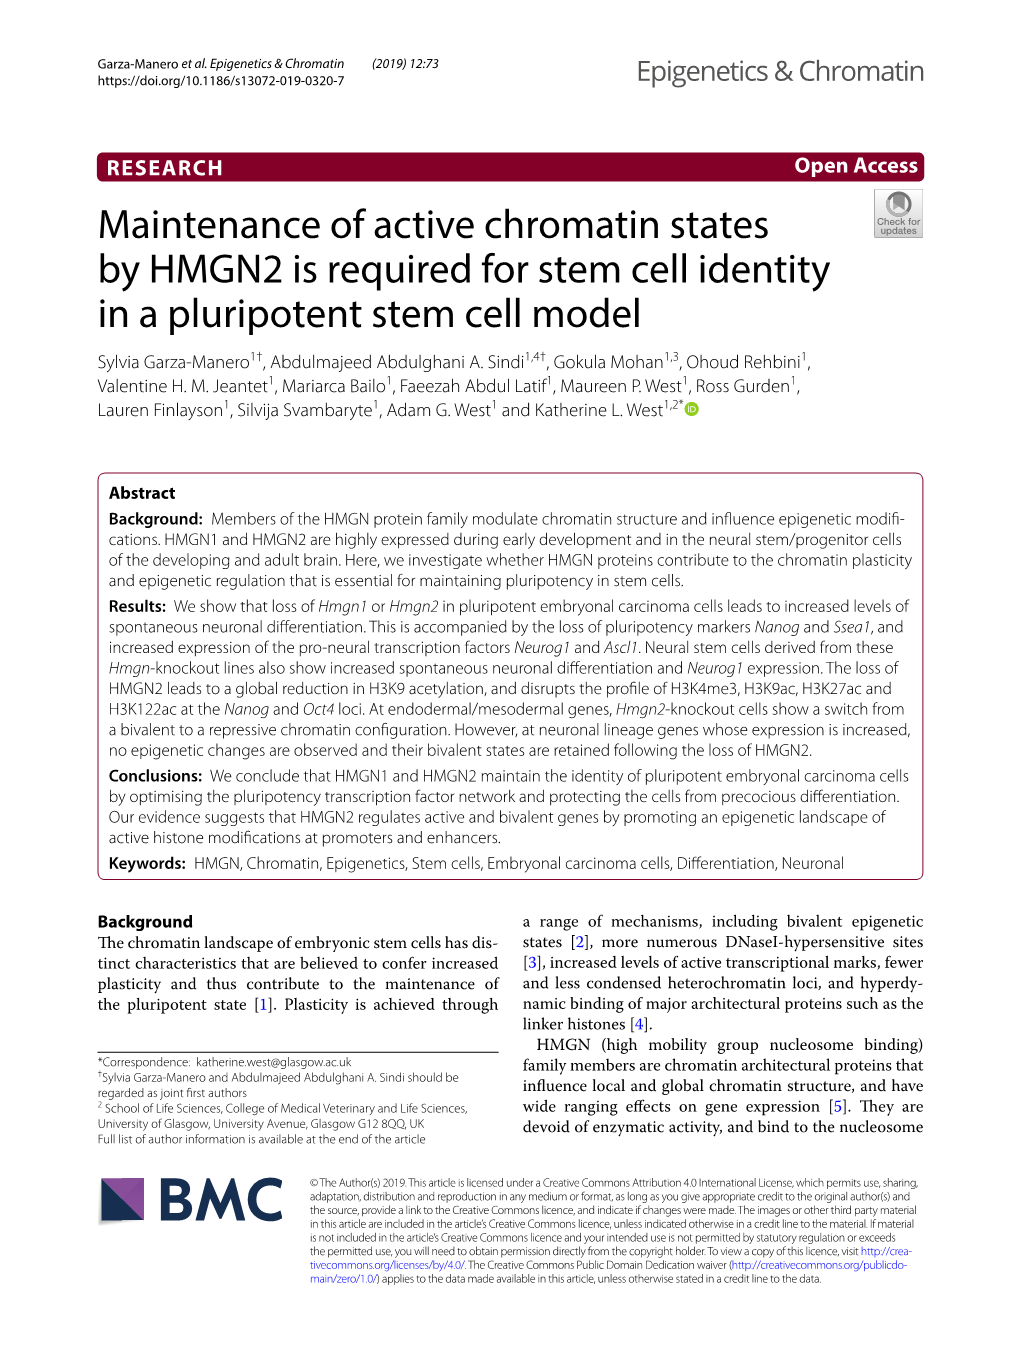 Maintenance of Active Chromatin States by HMGN2 Is Required for Stem Cell Identity in a Pluripotent Stem Cell Model Sylvia Garza‑Manero1†, Abdulmajeed Abdulghani A